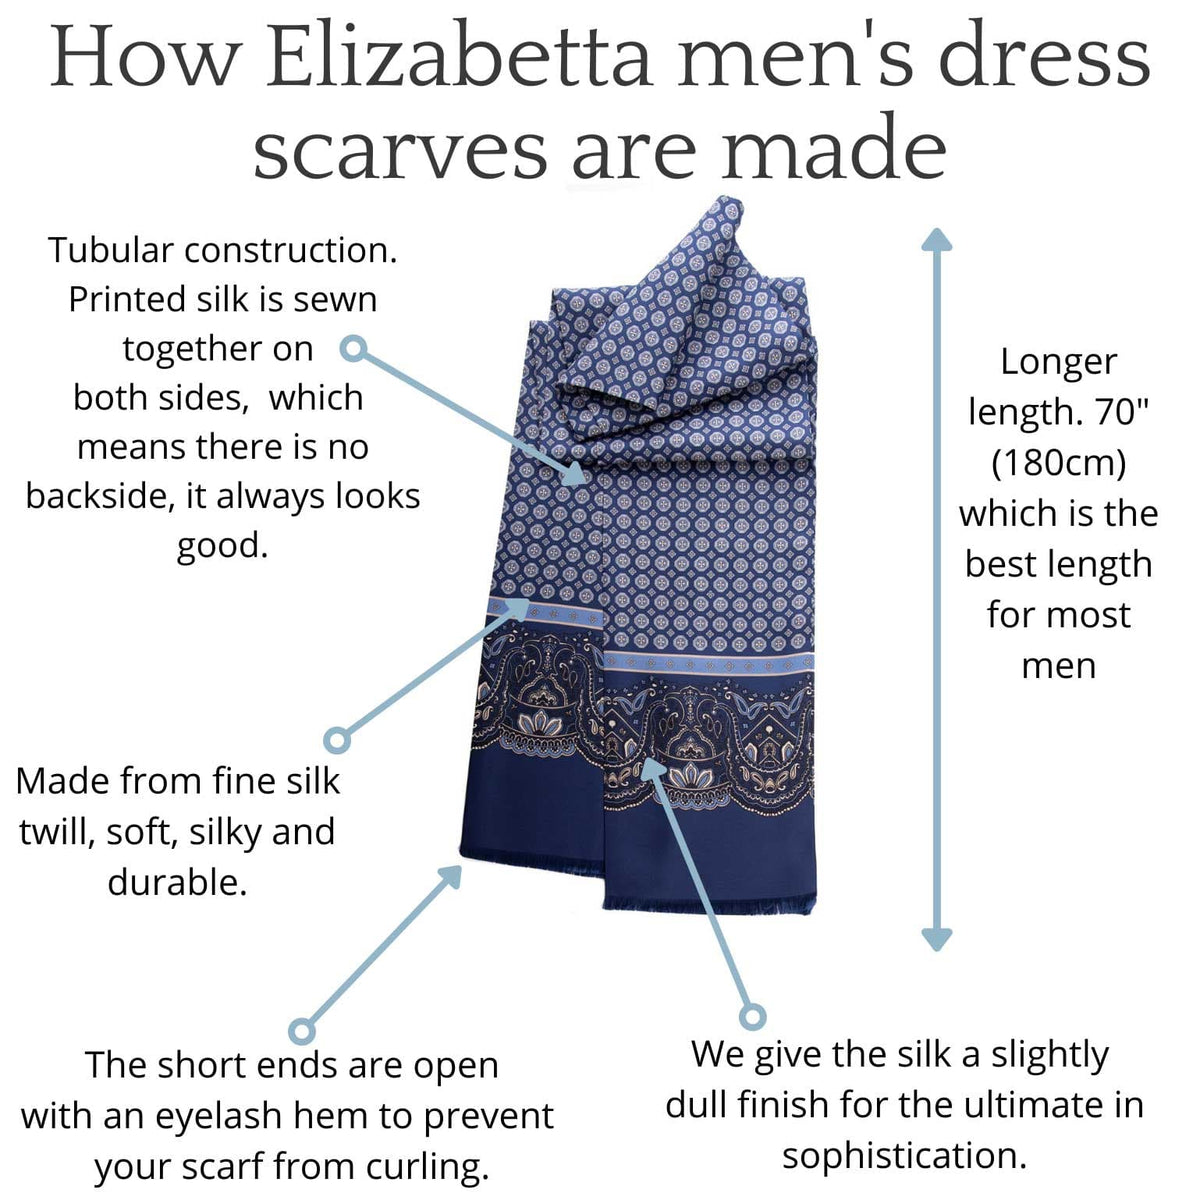 How an Eiizabetta men&#39;s dress scarves are made